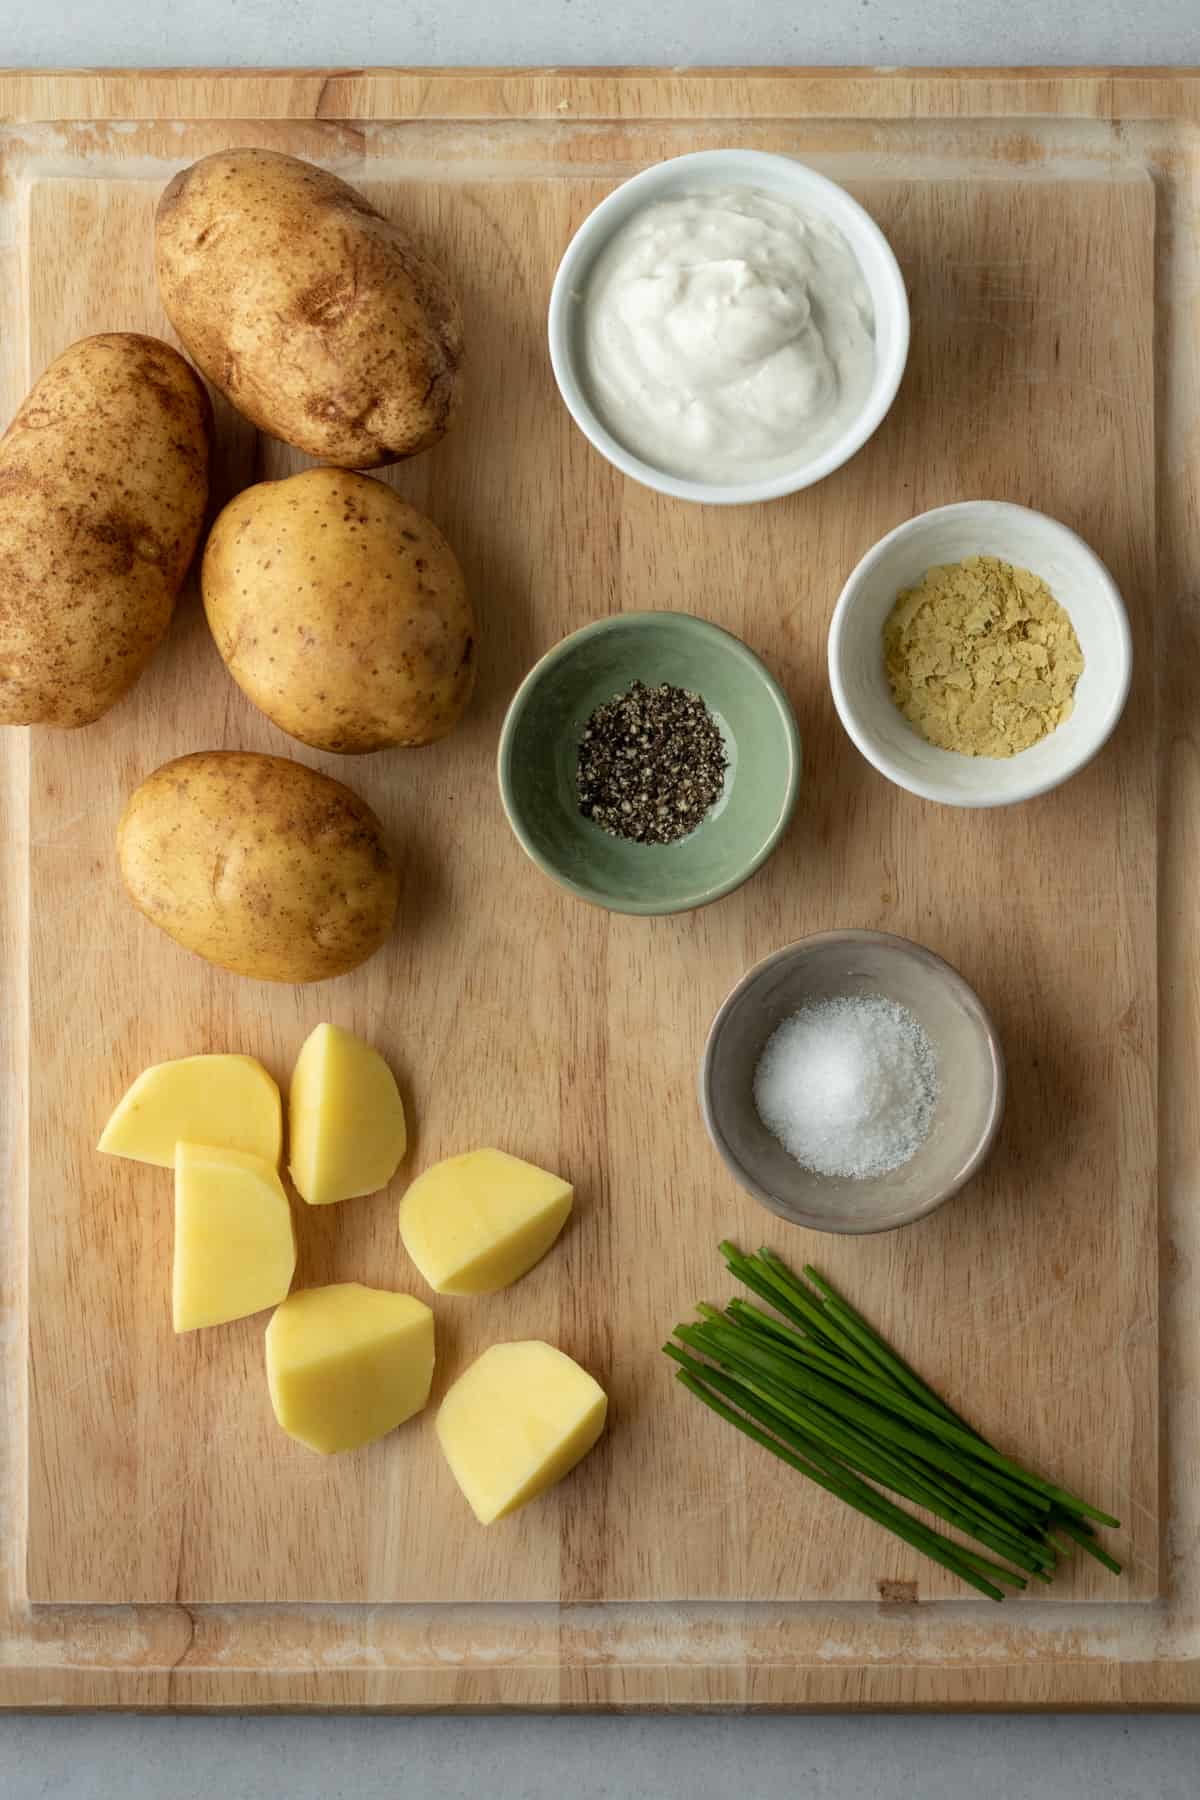 Ingredients for mashed potatoes on a cutting board.